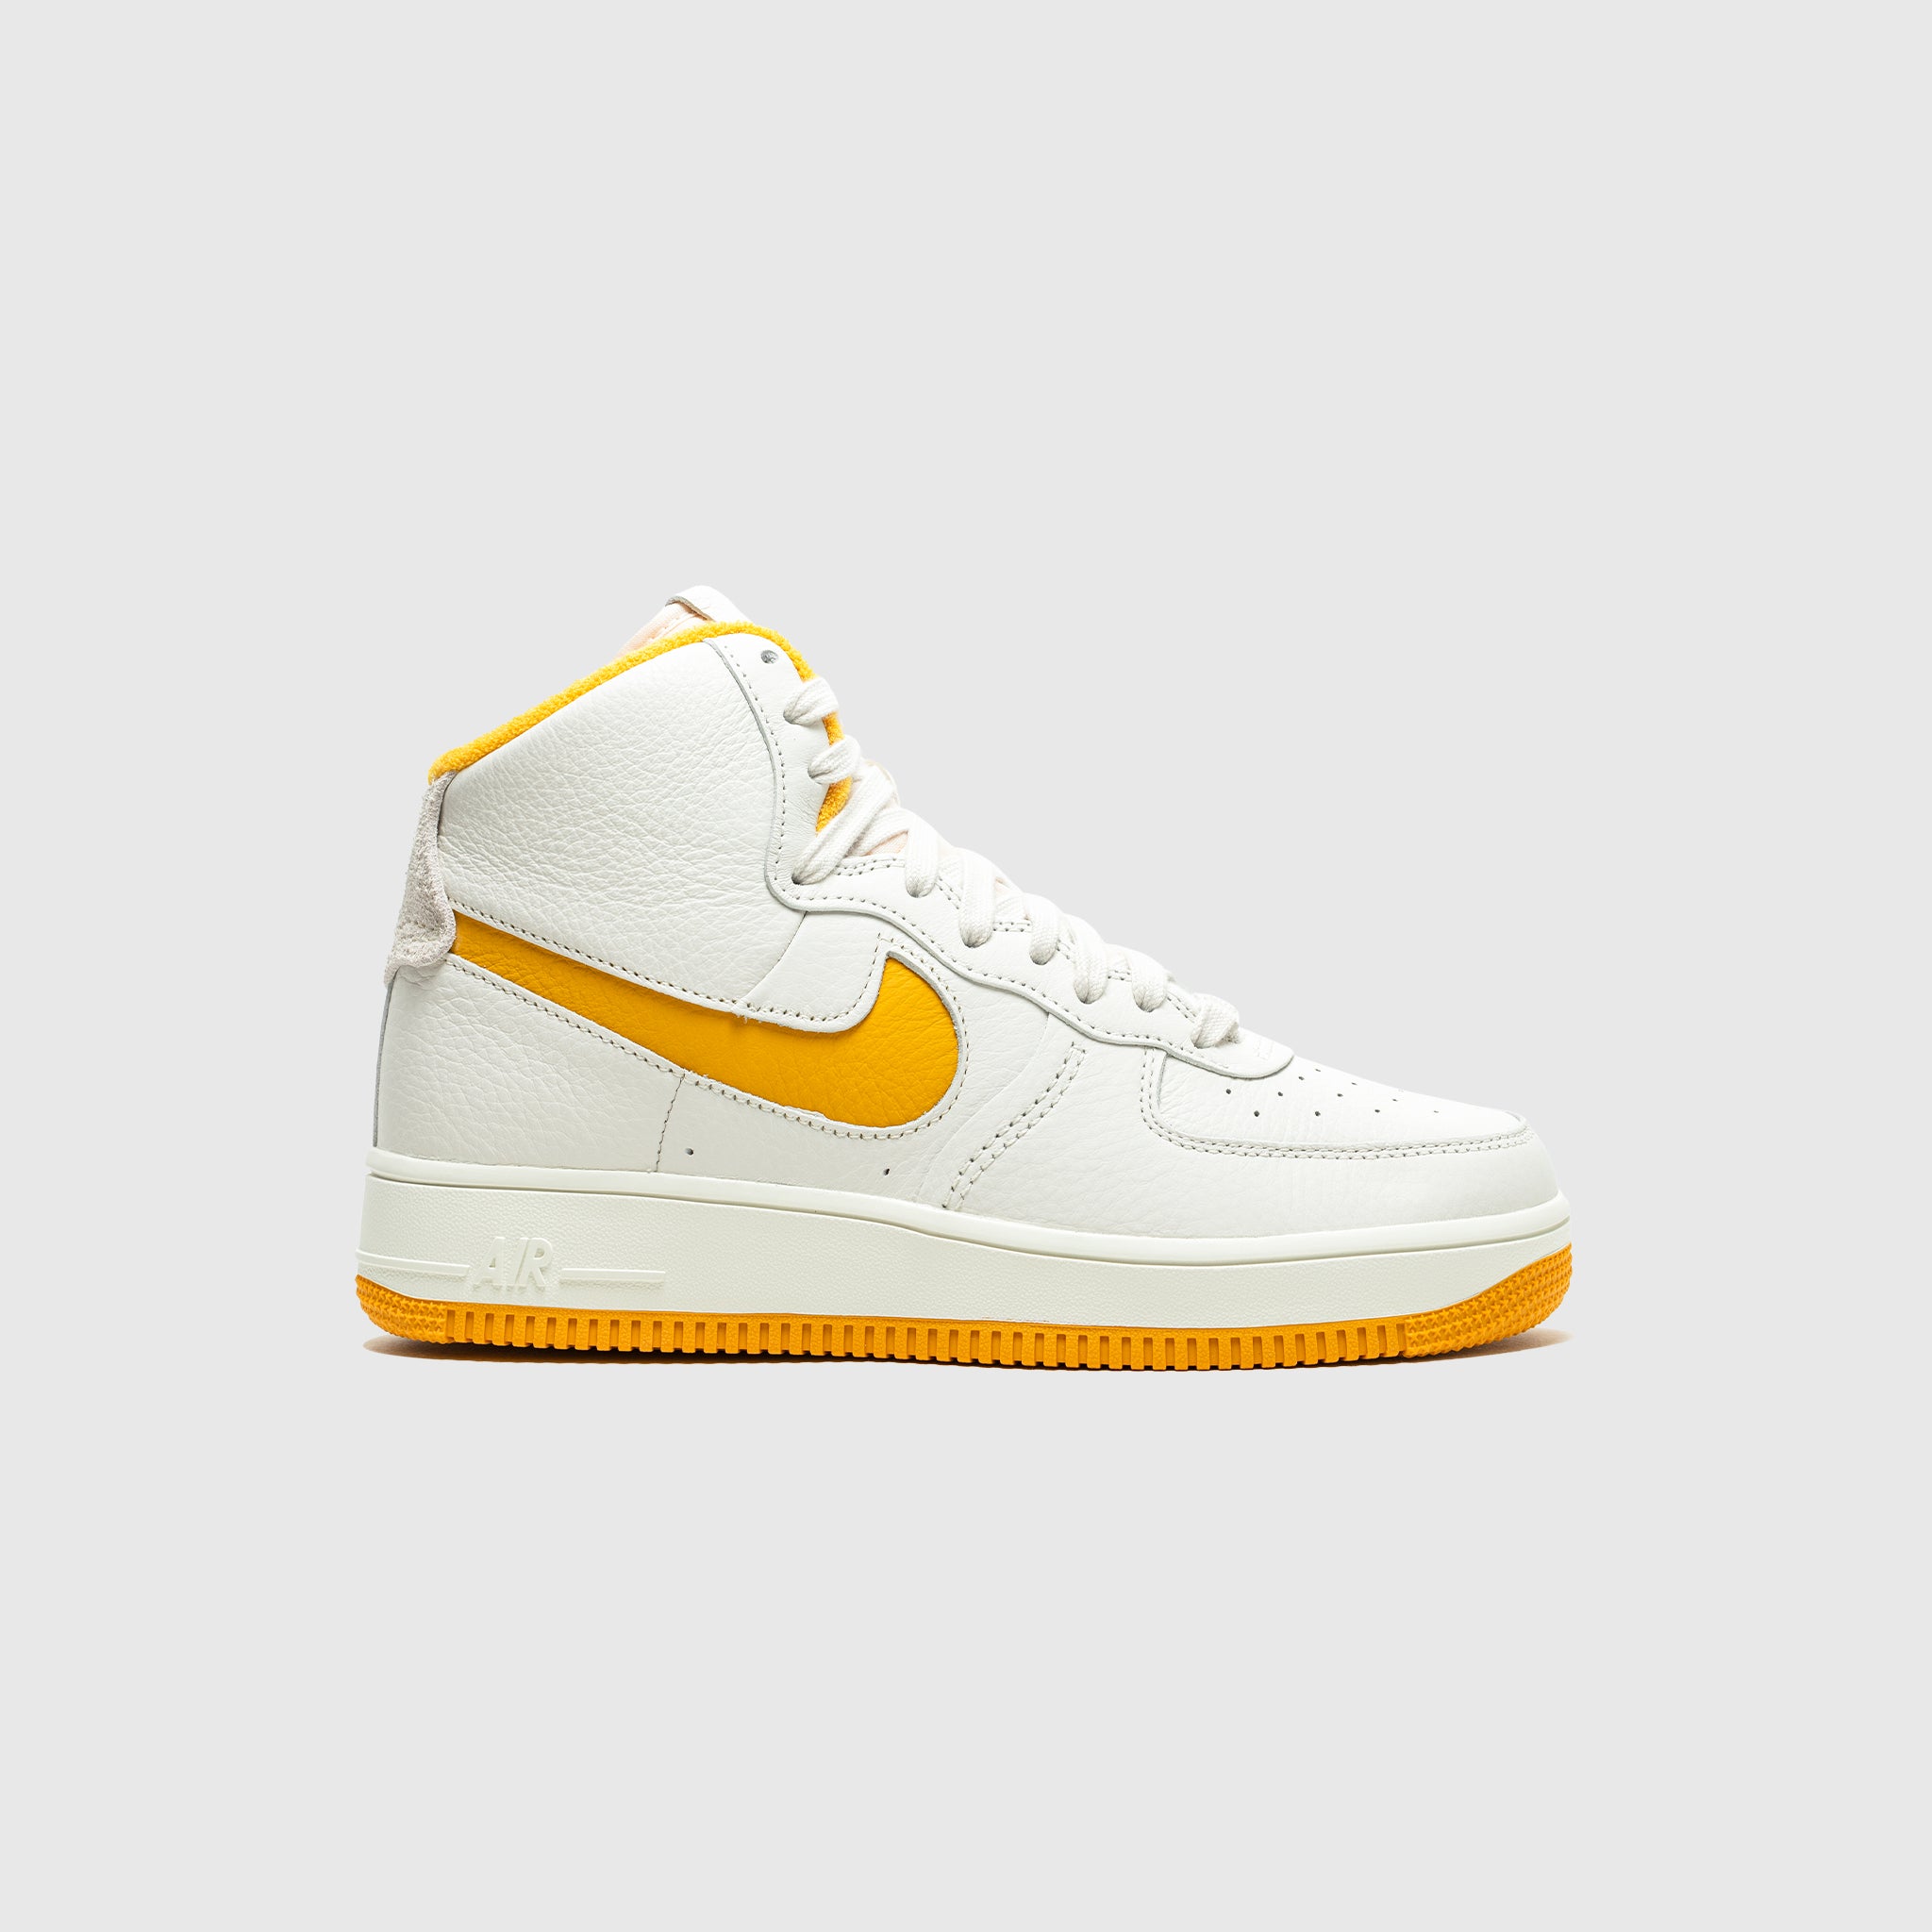 AIR FORCE 1 LOW RETRO SPEED YELLOW – PACKER SHOES